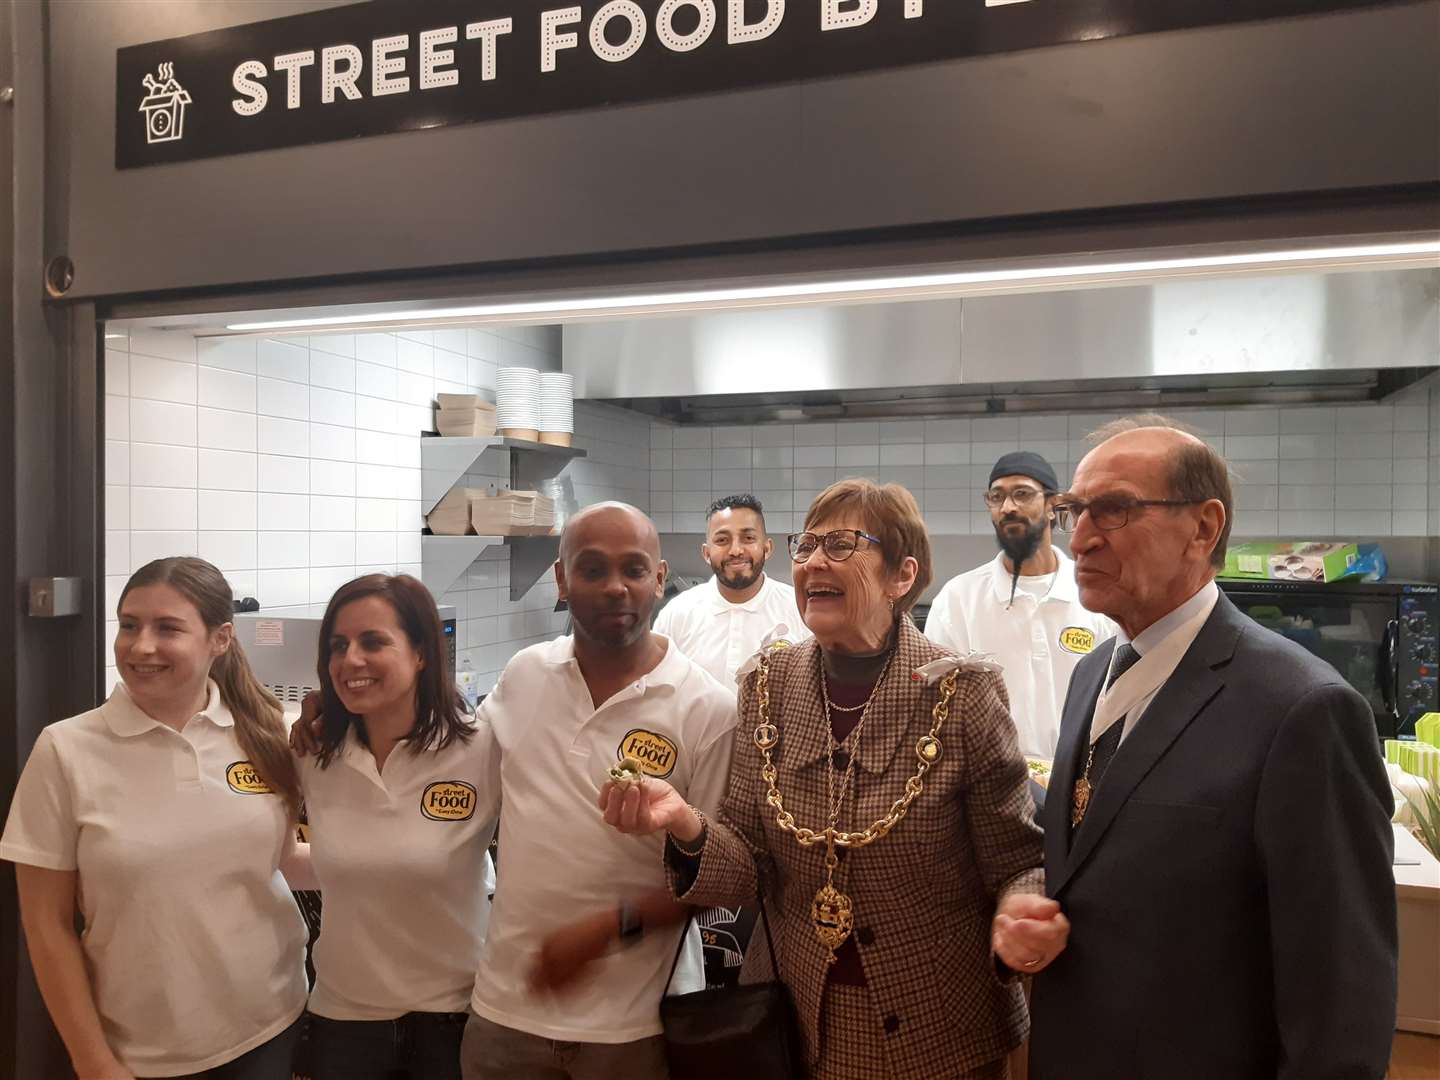 The Mayor Fay Gooch and her consort Peter Gooch visits Street Food by Easydine at the food hall